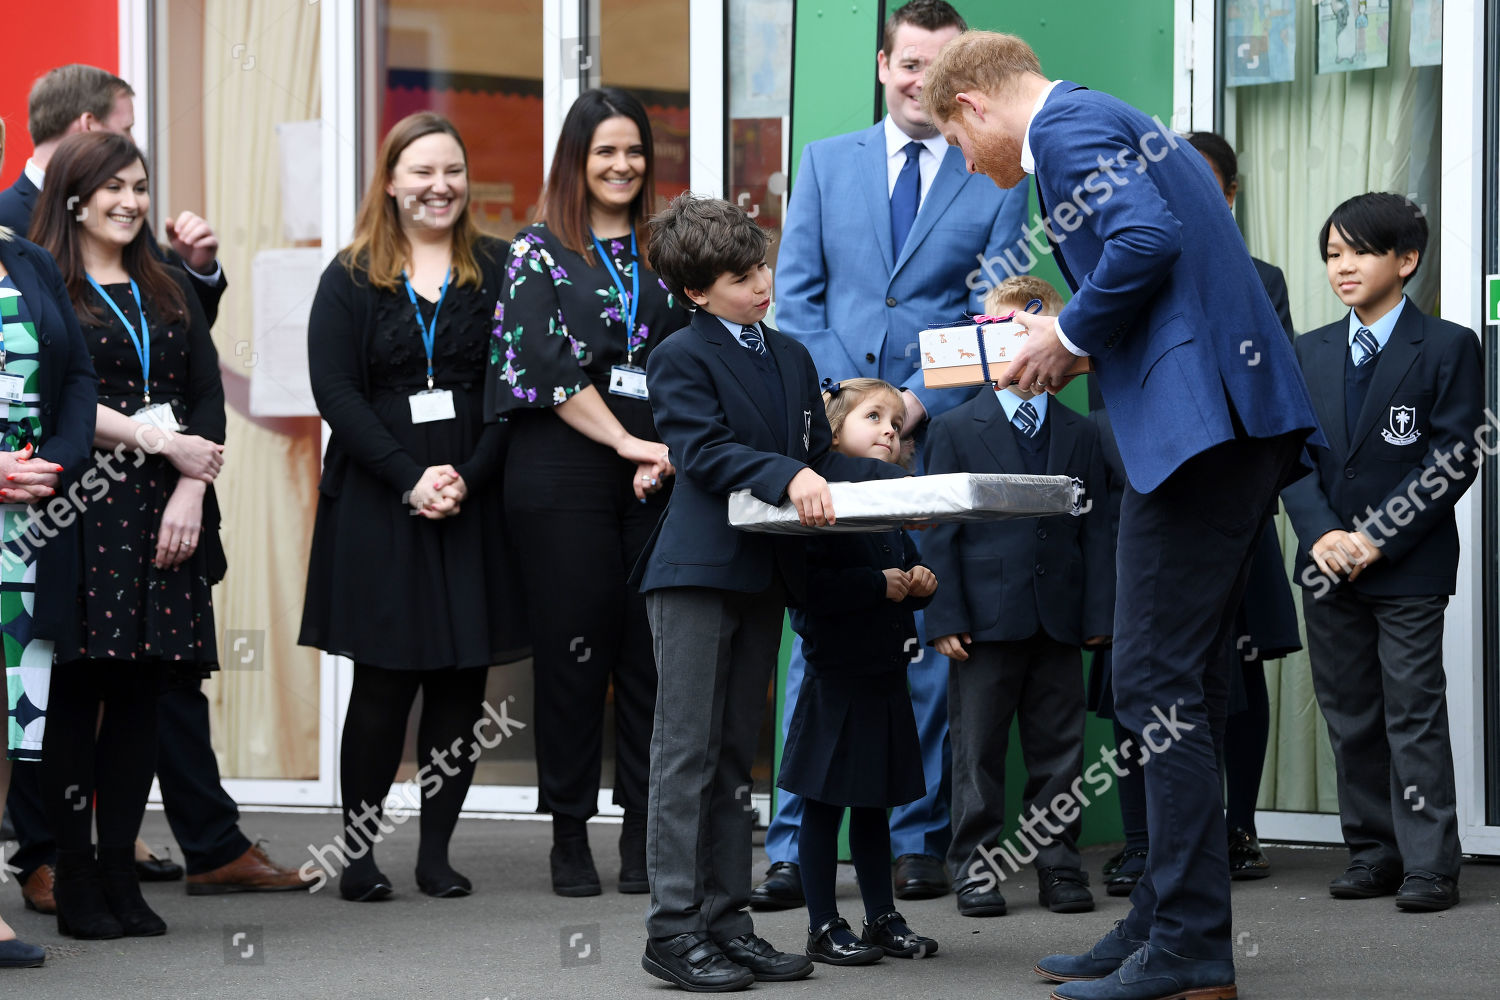 prince-harry-visits-st-vincents-catholic-primary-school-for-commonwealth-canopy-and-woodland-trust-tree-planting-ceremony-london-uk-shutterstock-editorial-10160984ah.jpg